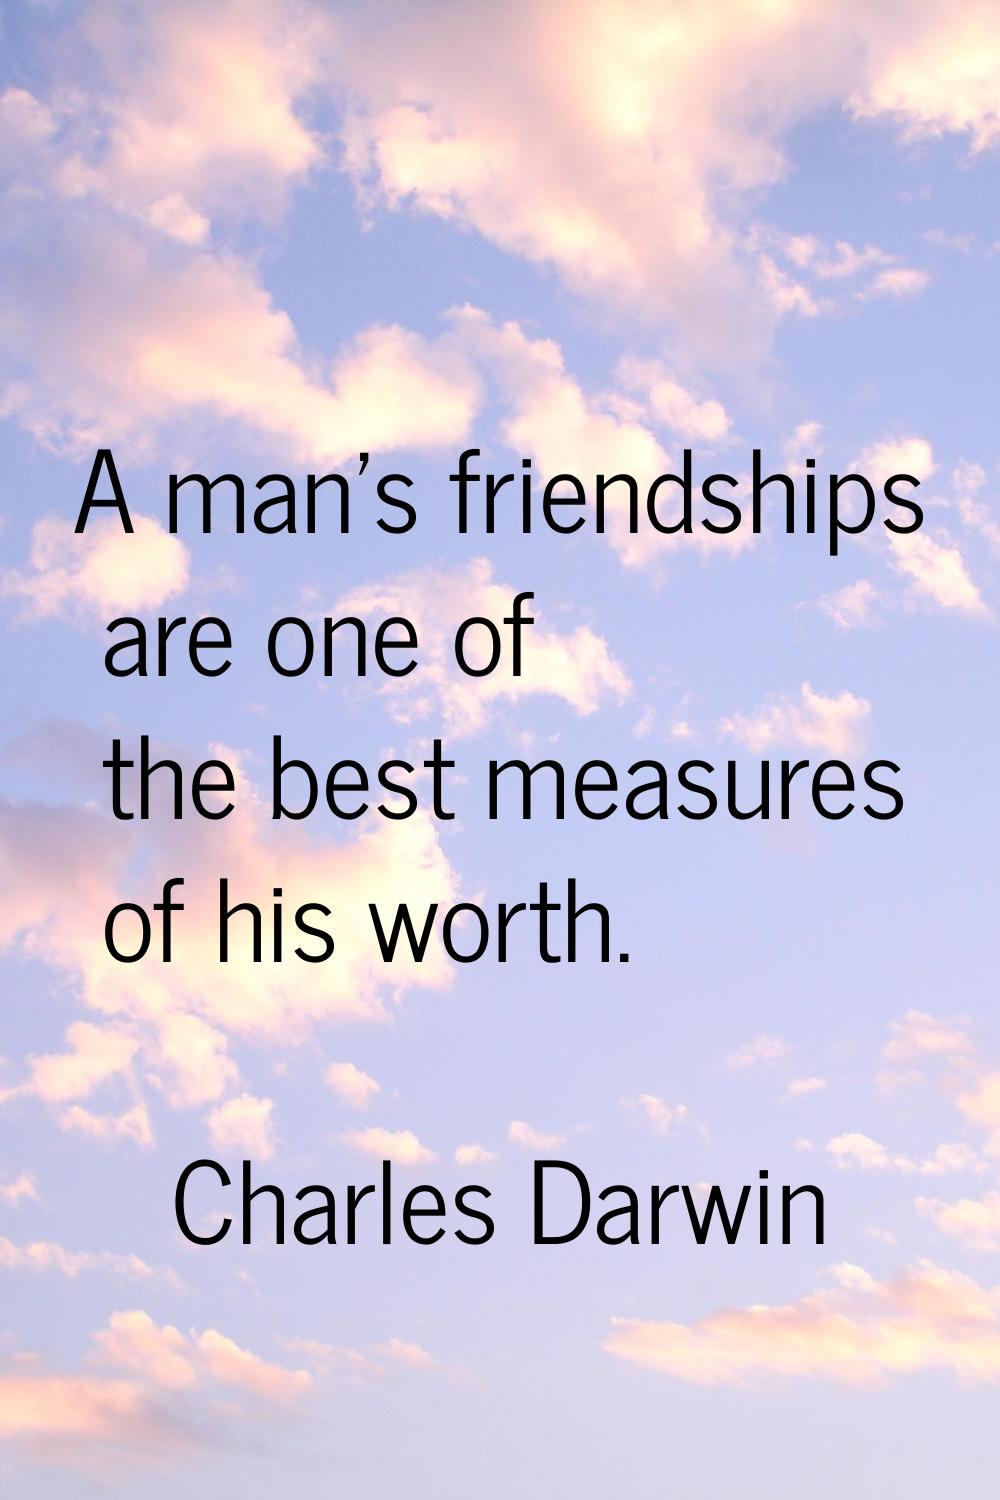 A man's friendships are one of the best measures of his worth.